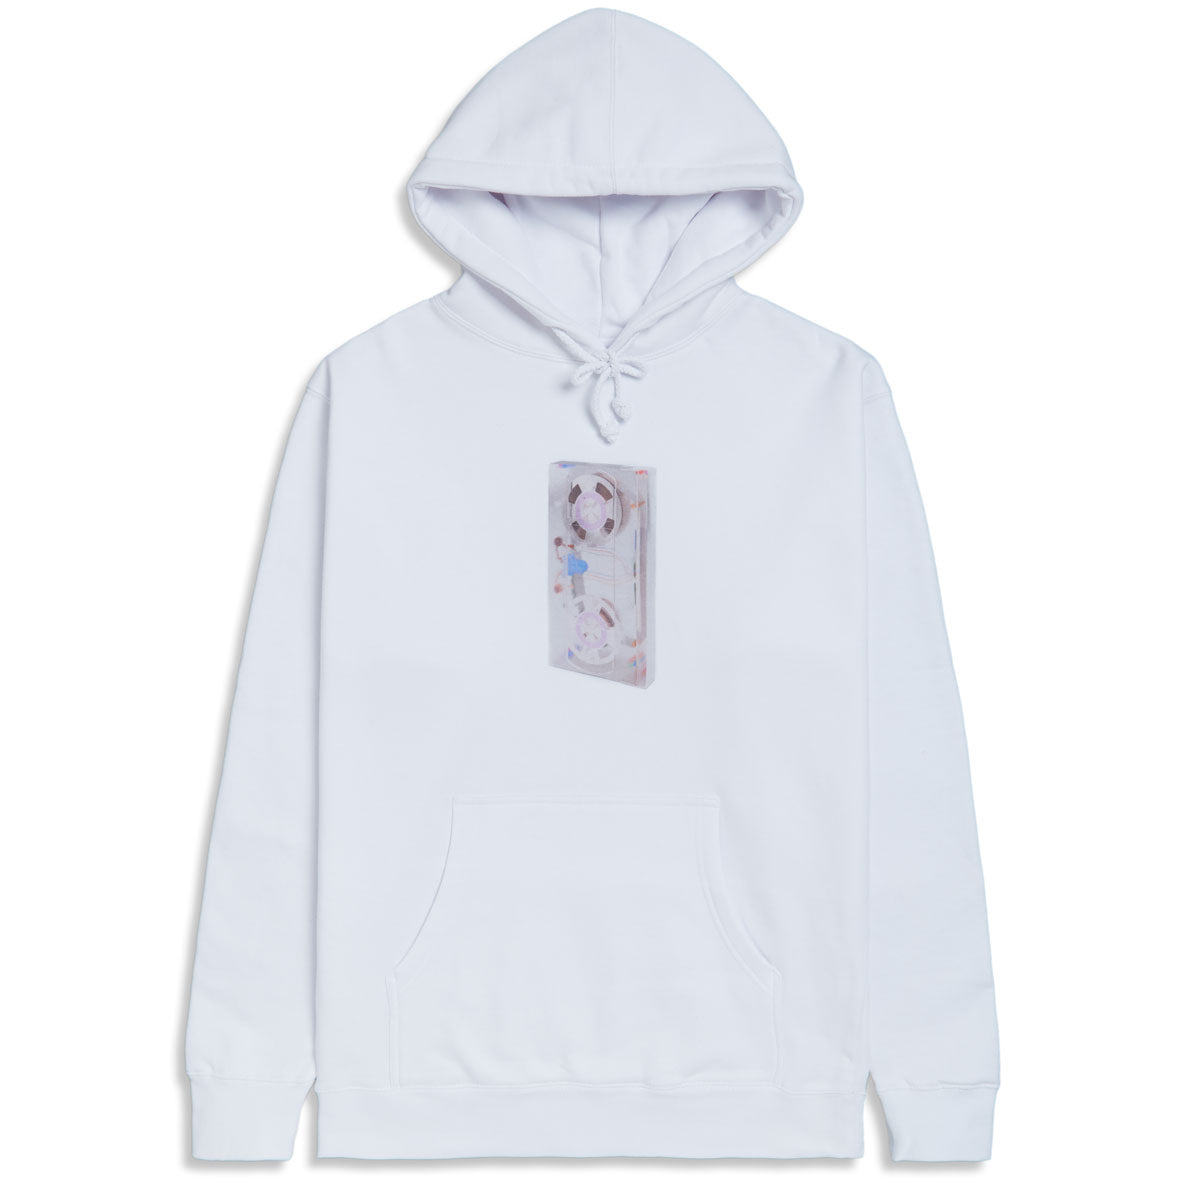 CCS Going Clear VHS Hoodie - White image 1